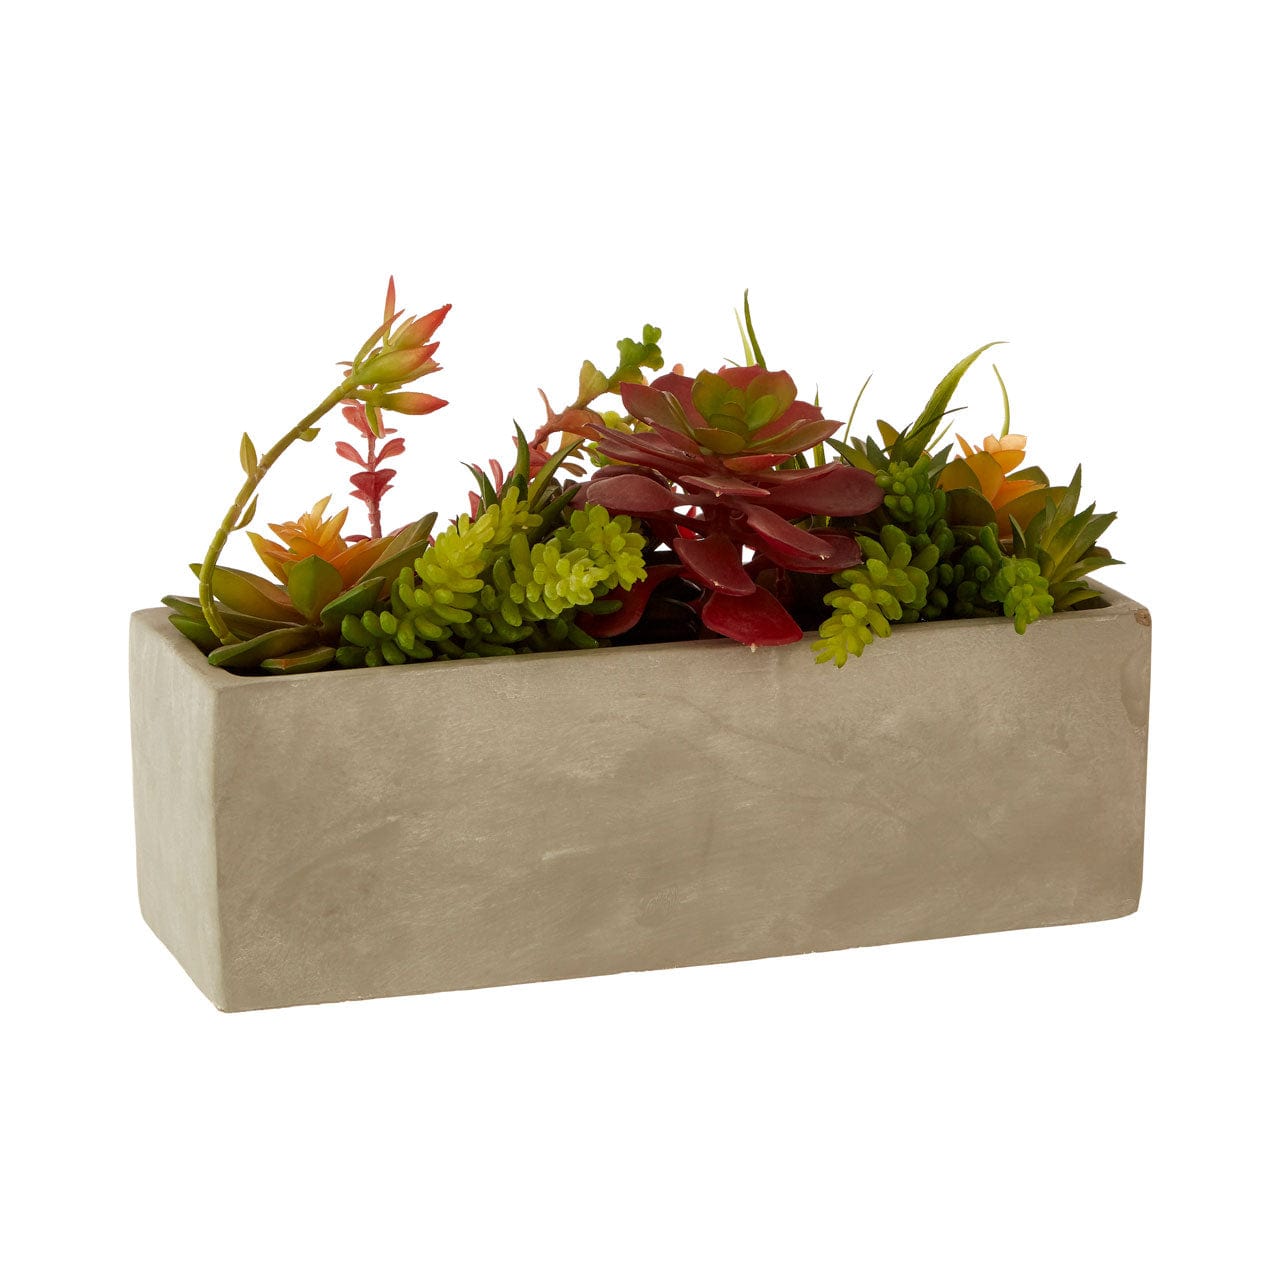 Hamilton Interiors Accessories Fiori Mixed Succulents With Cement Pot House of Isabella UK